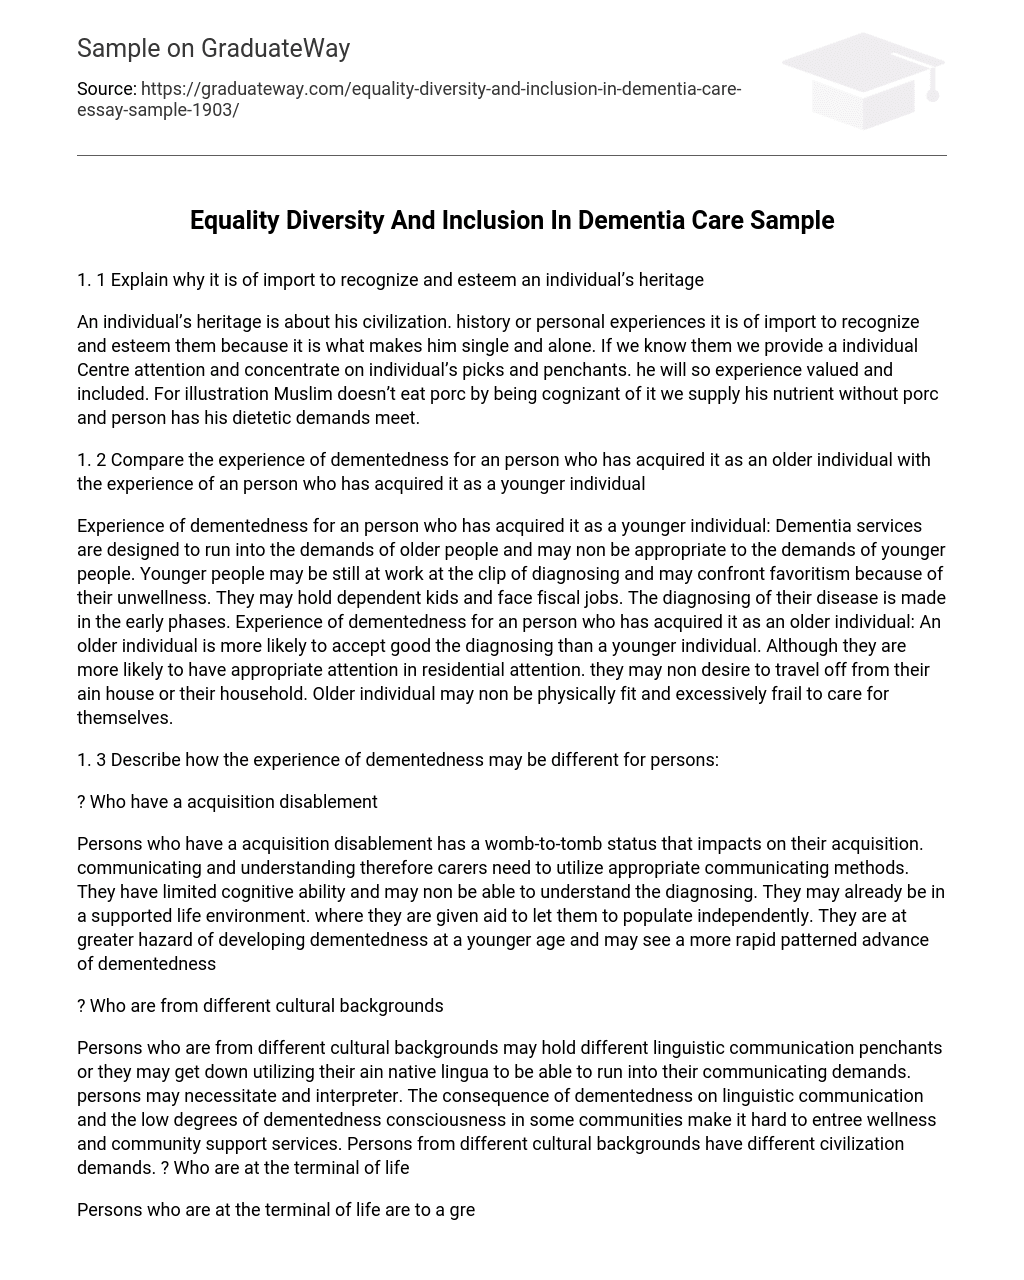 Equality Diversity And Inclusion In Dementia Care Sample